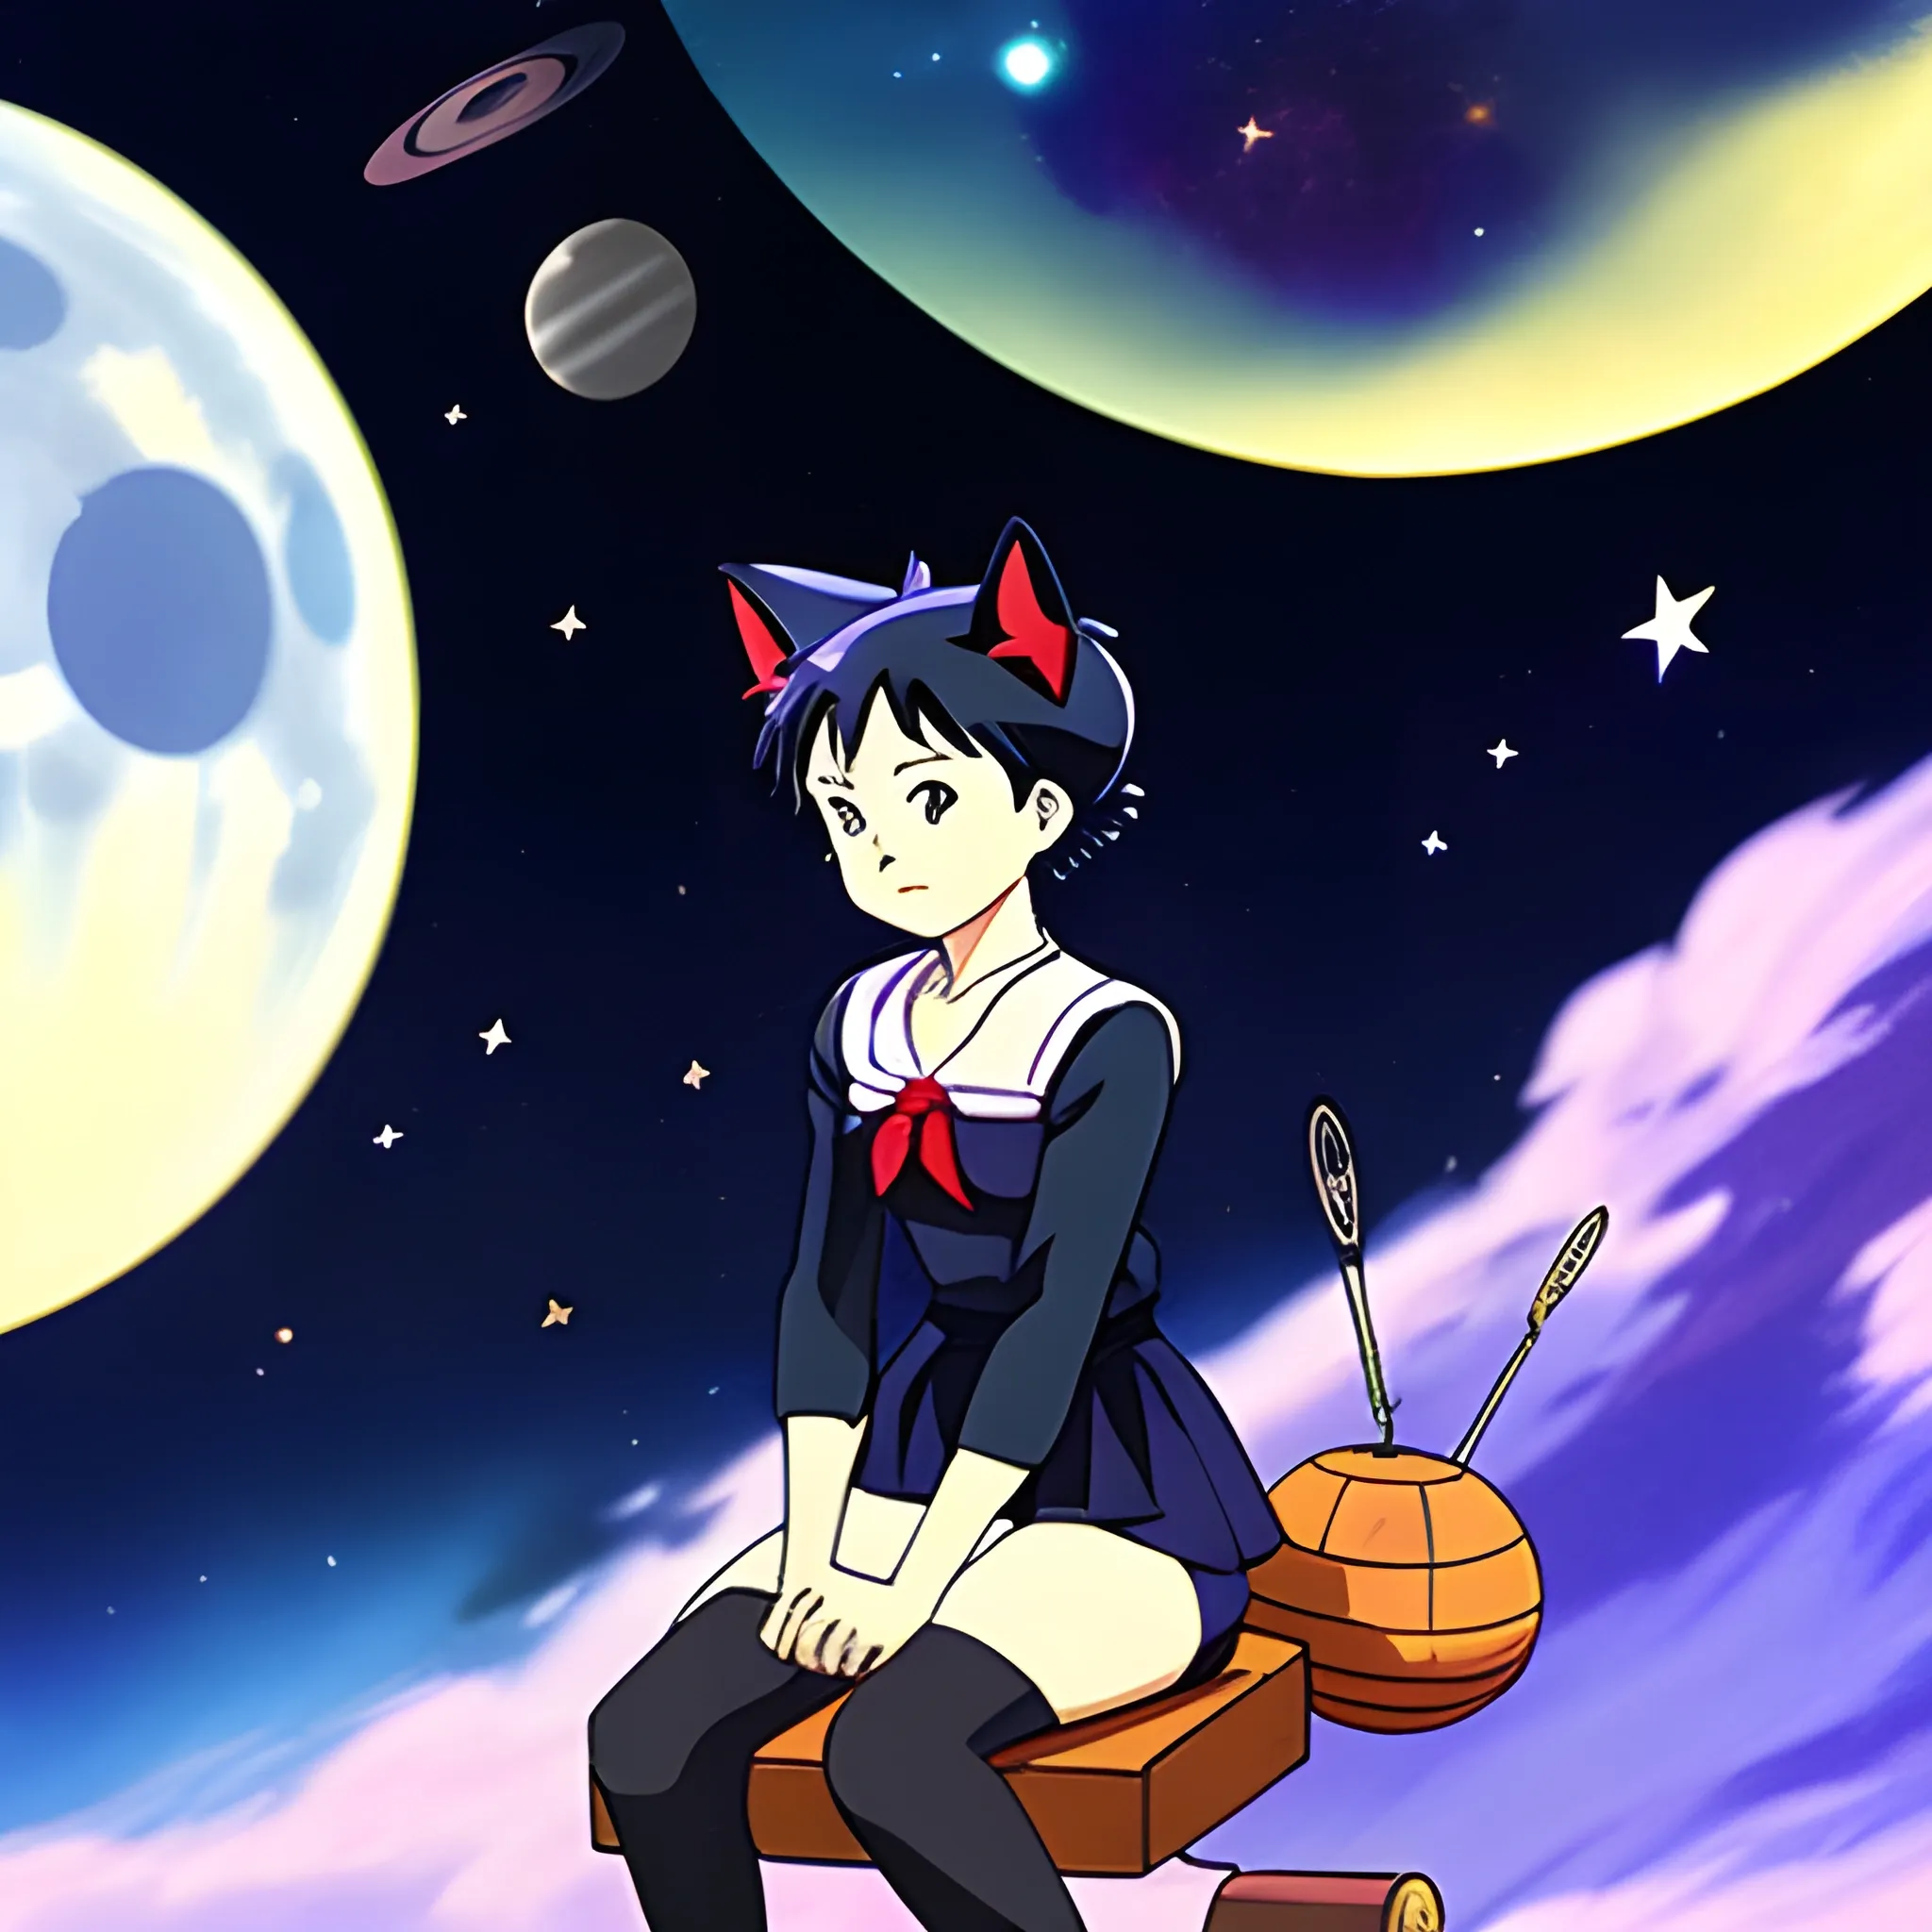 Kiki's delivery service in space galaxy stardust Moon fantasy anime